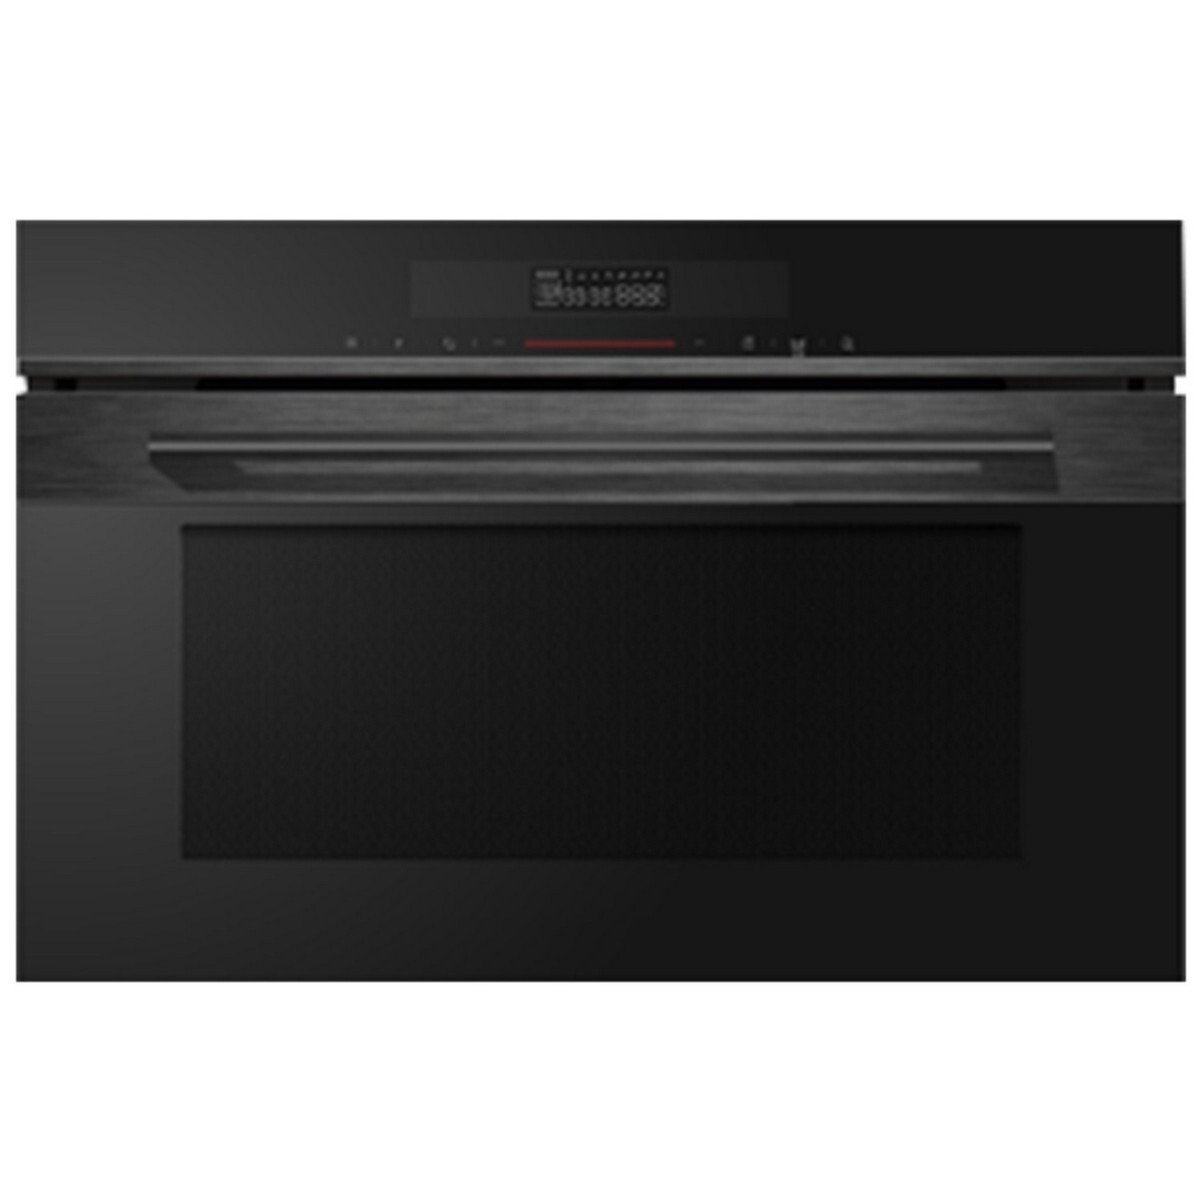 Hafele Built-In Convection Microwave Diamond 34 MWO